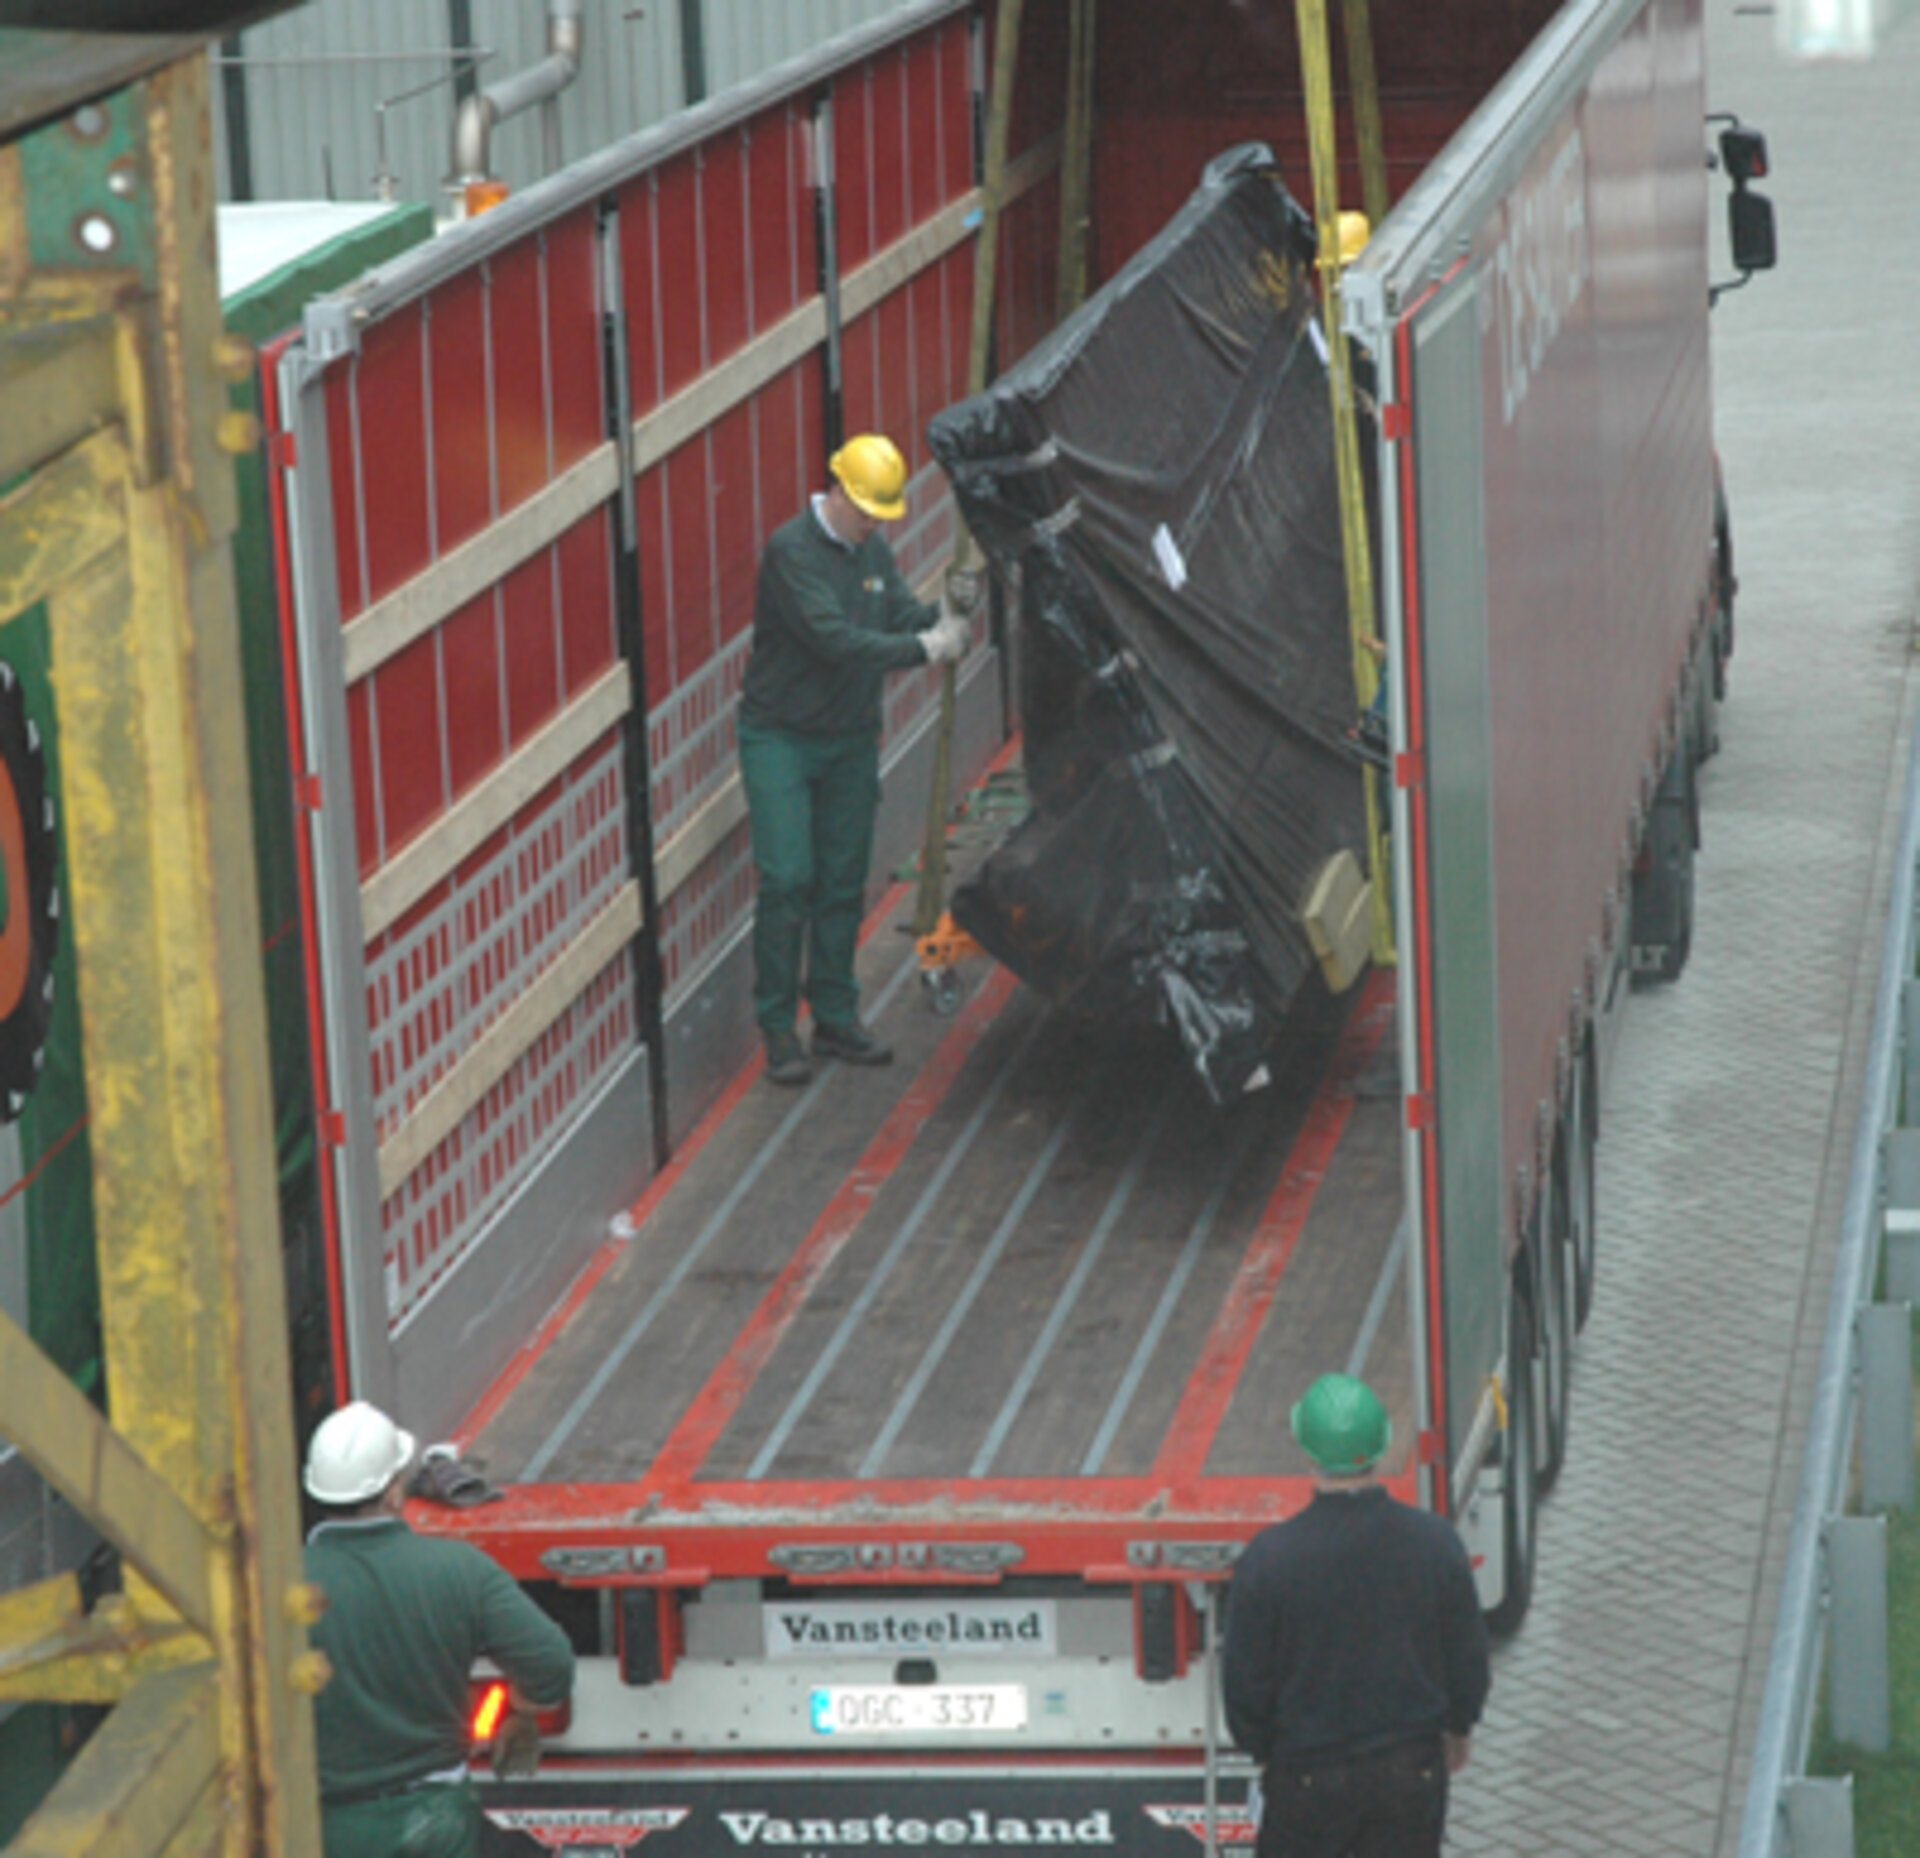 The glass screen is unloaded from its delivery truck